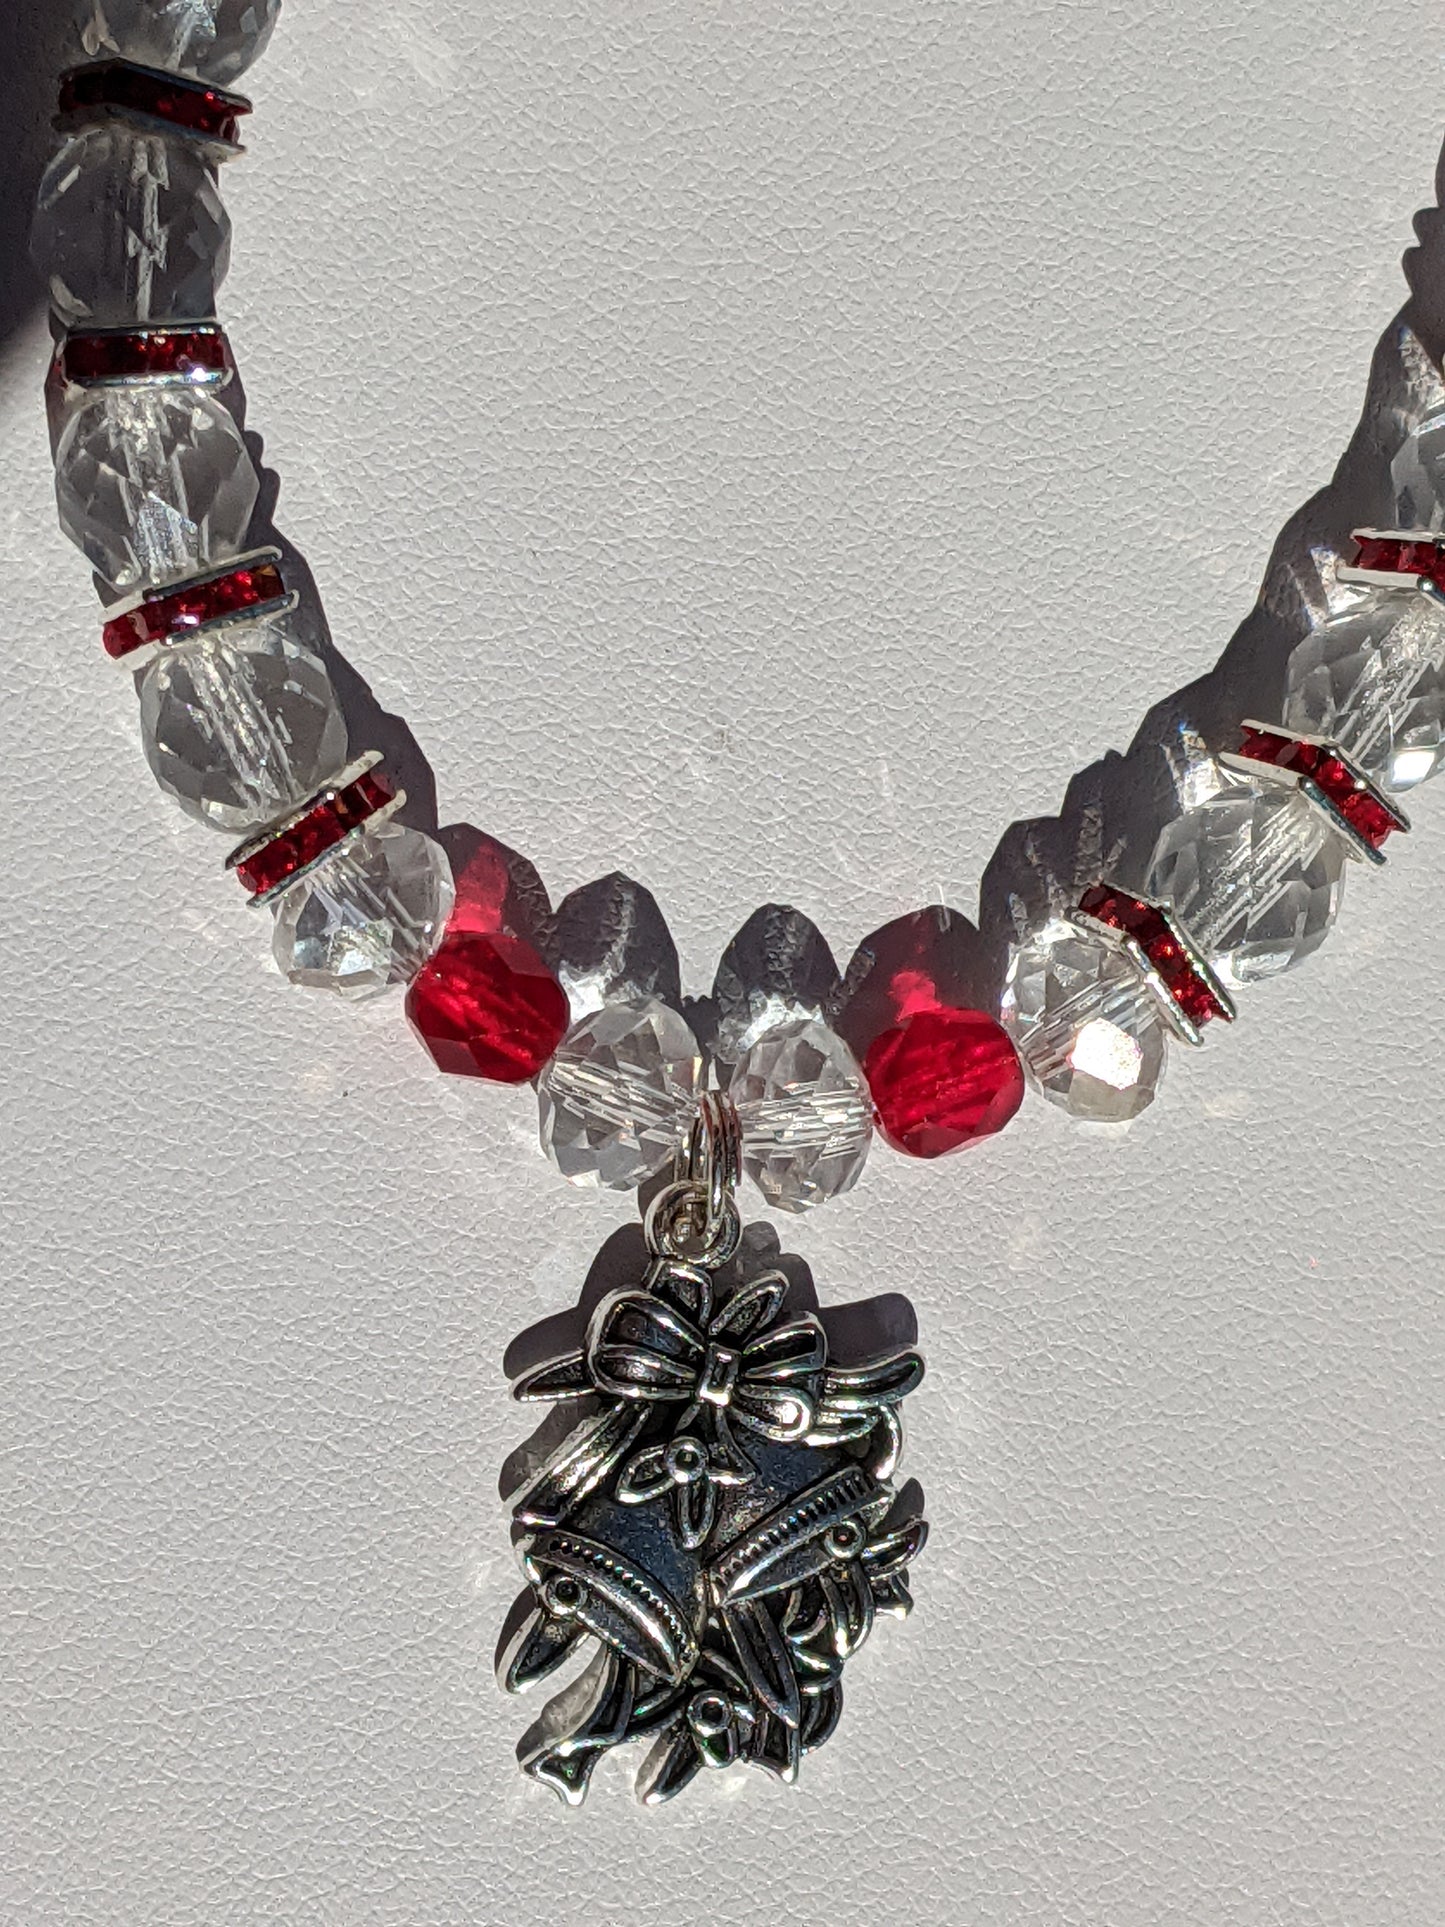 Holiday Bells Charm Bracelet made with Red Swarovski Crystal Accents